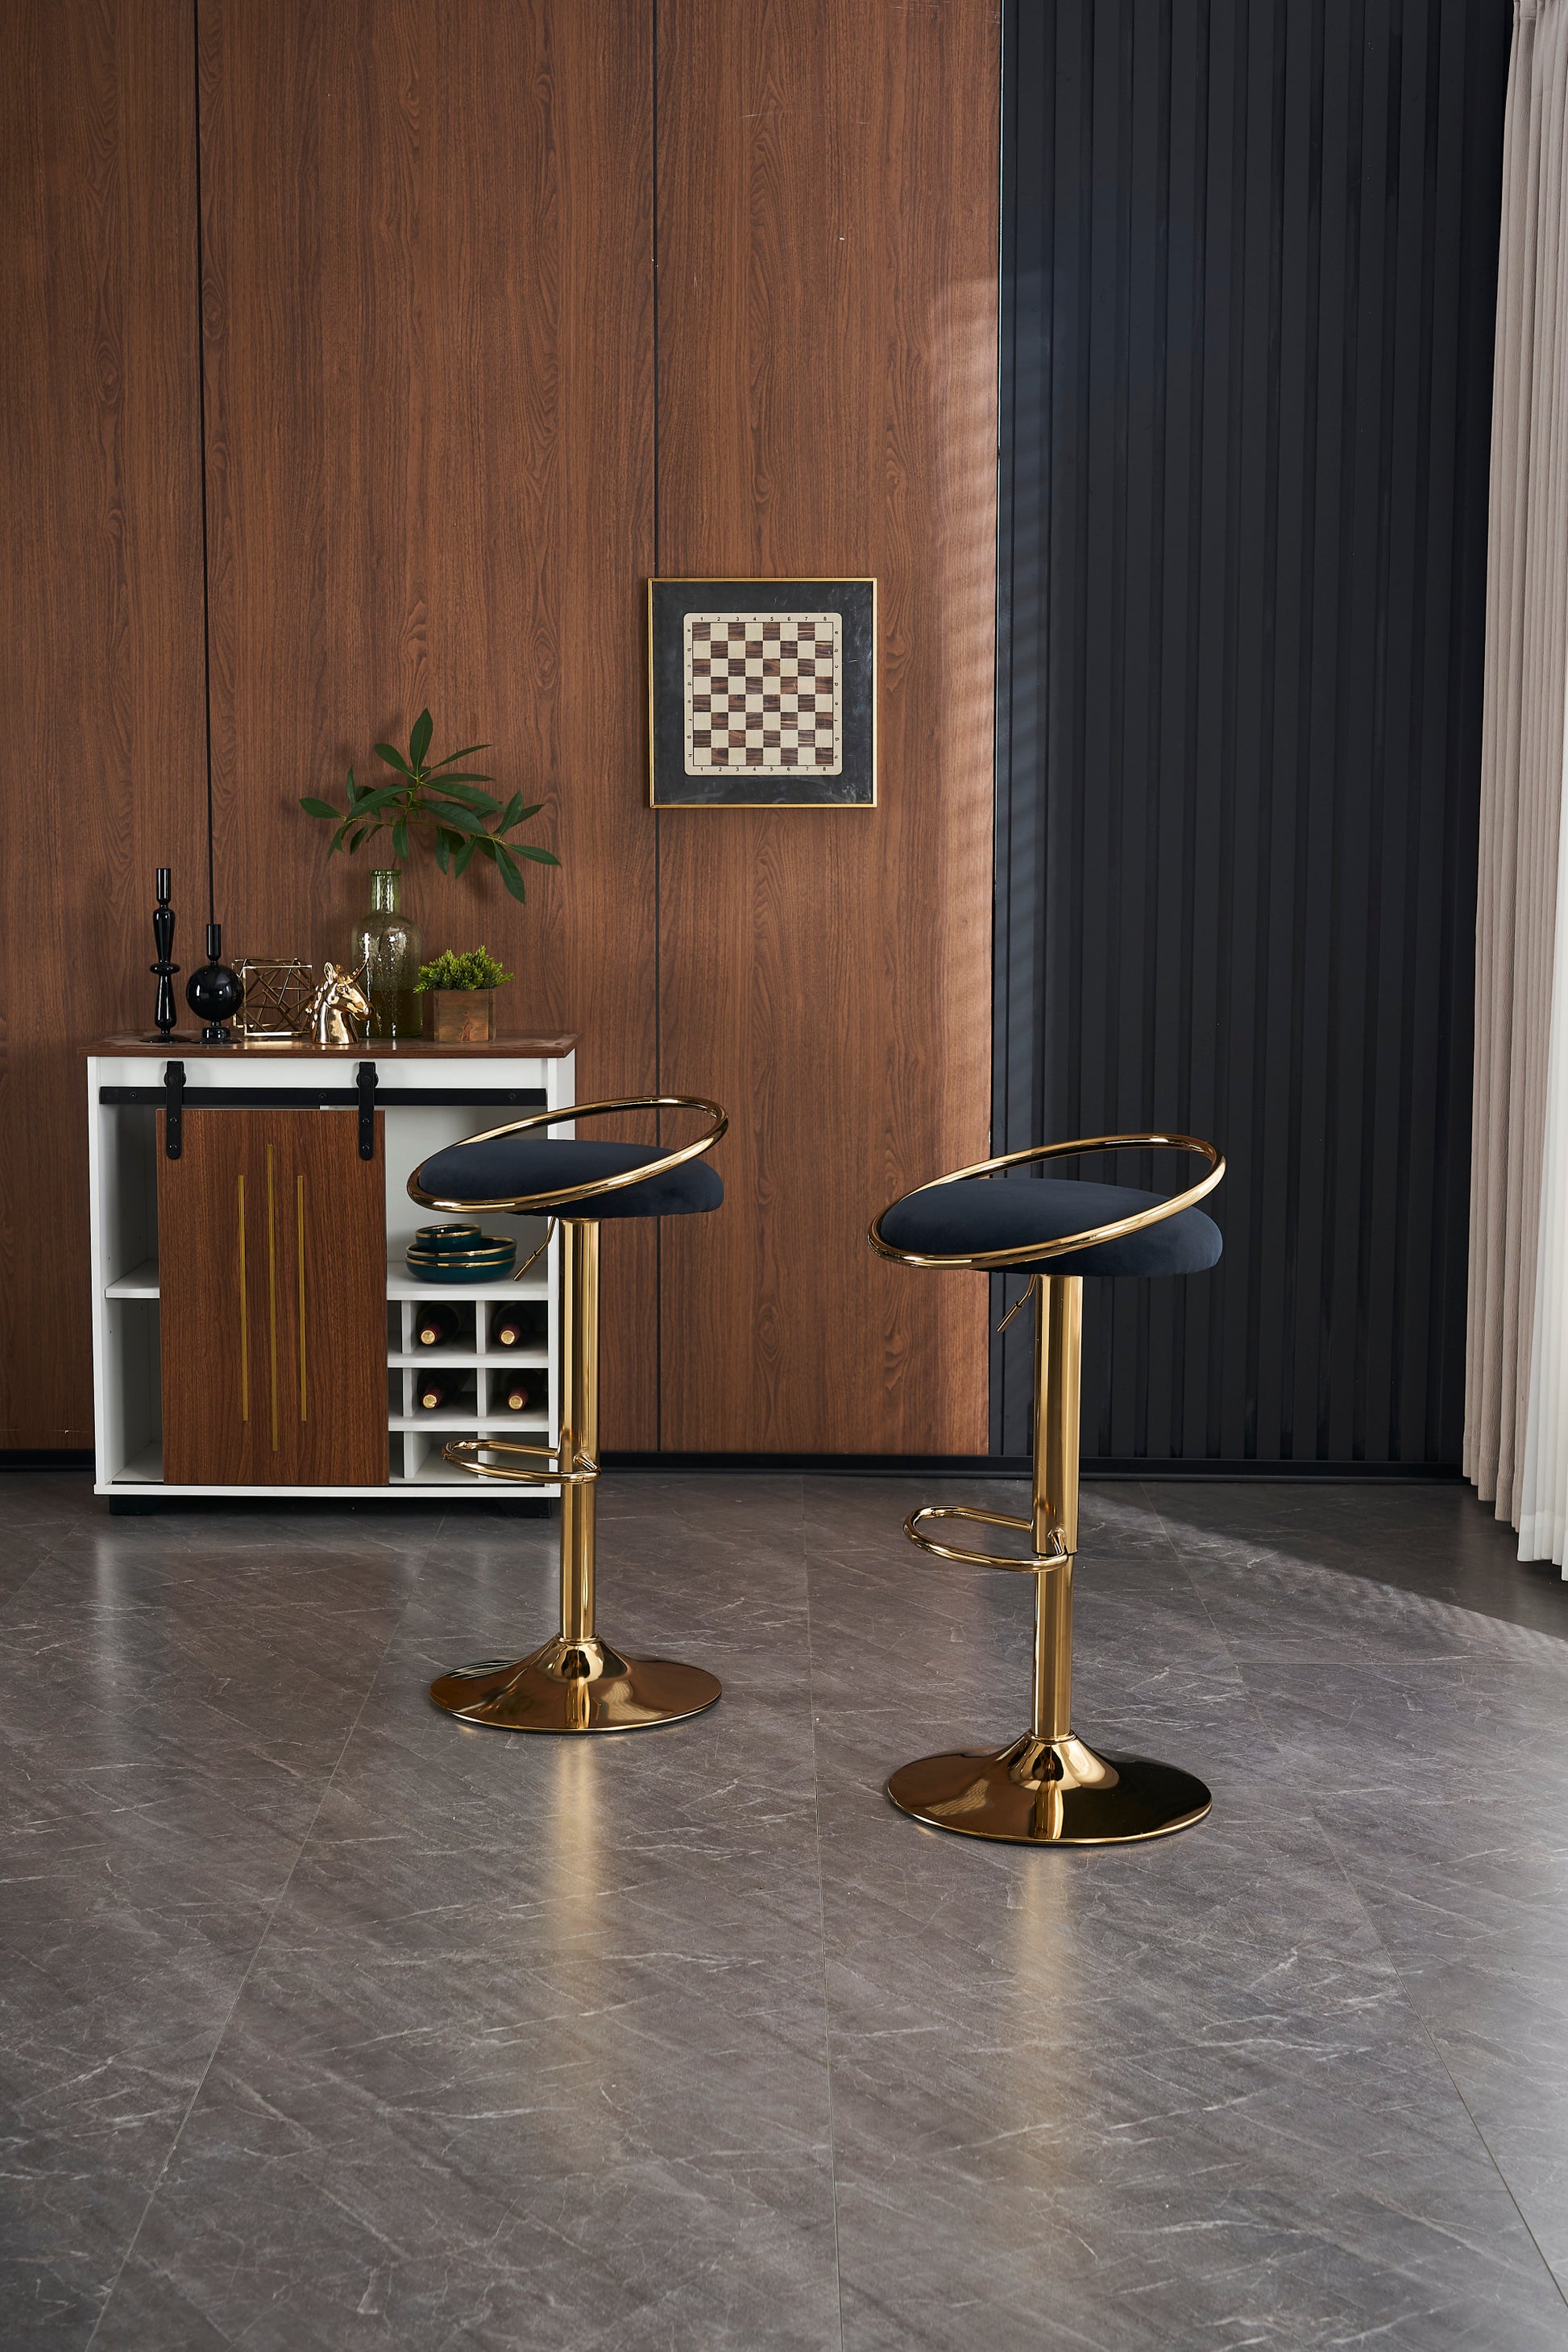 Bar Stools Set of 2 Counter Height  Adjustable velvet Padded 360° Swivel Bar Chairs  Modern Industrial Style Barstool for Home Kitchen Island(2PCS/CTN) - Enova Luxe Home Store